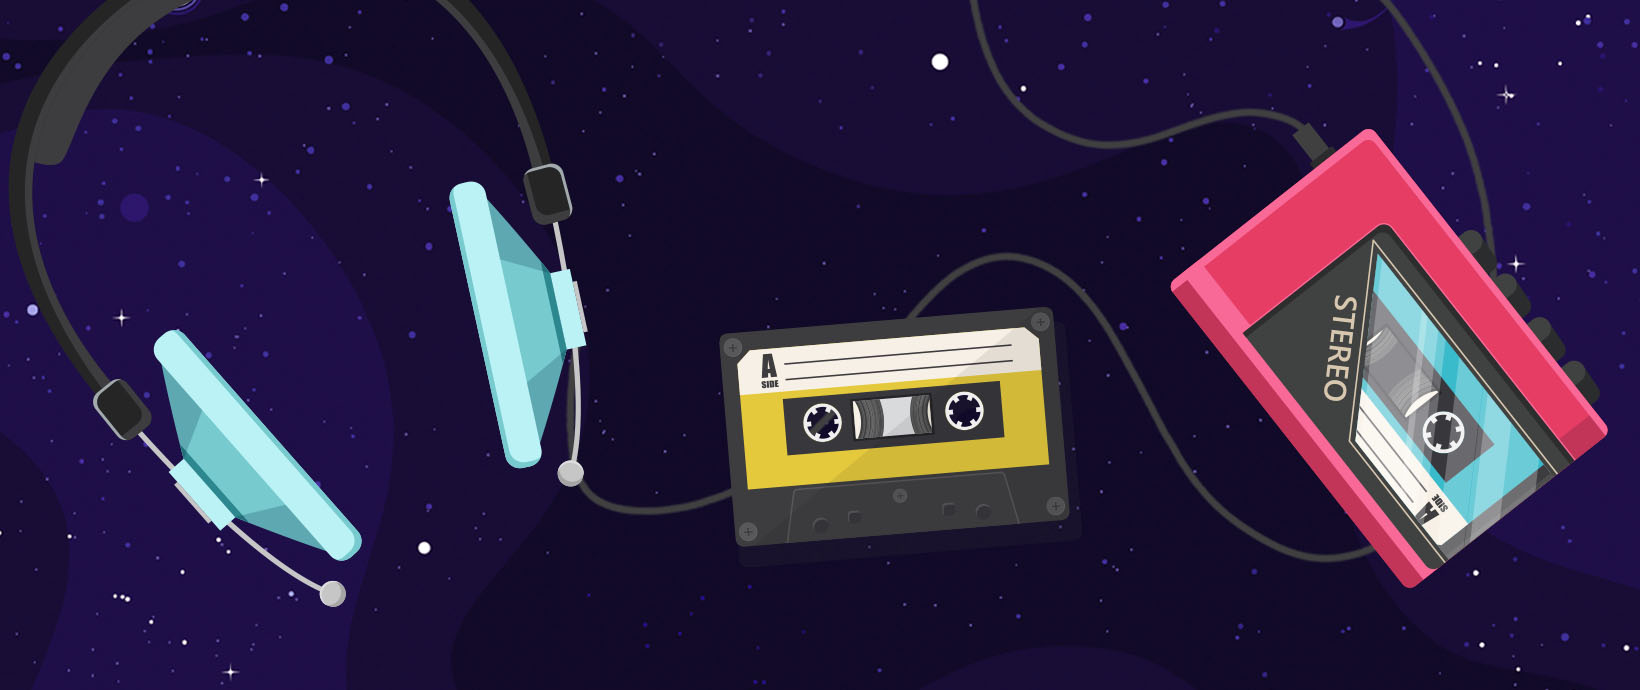 Digital Debunking: Could Star-Lord’s Sony Walkman Survive 26 Years in Space?